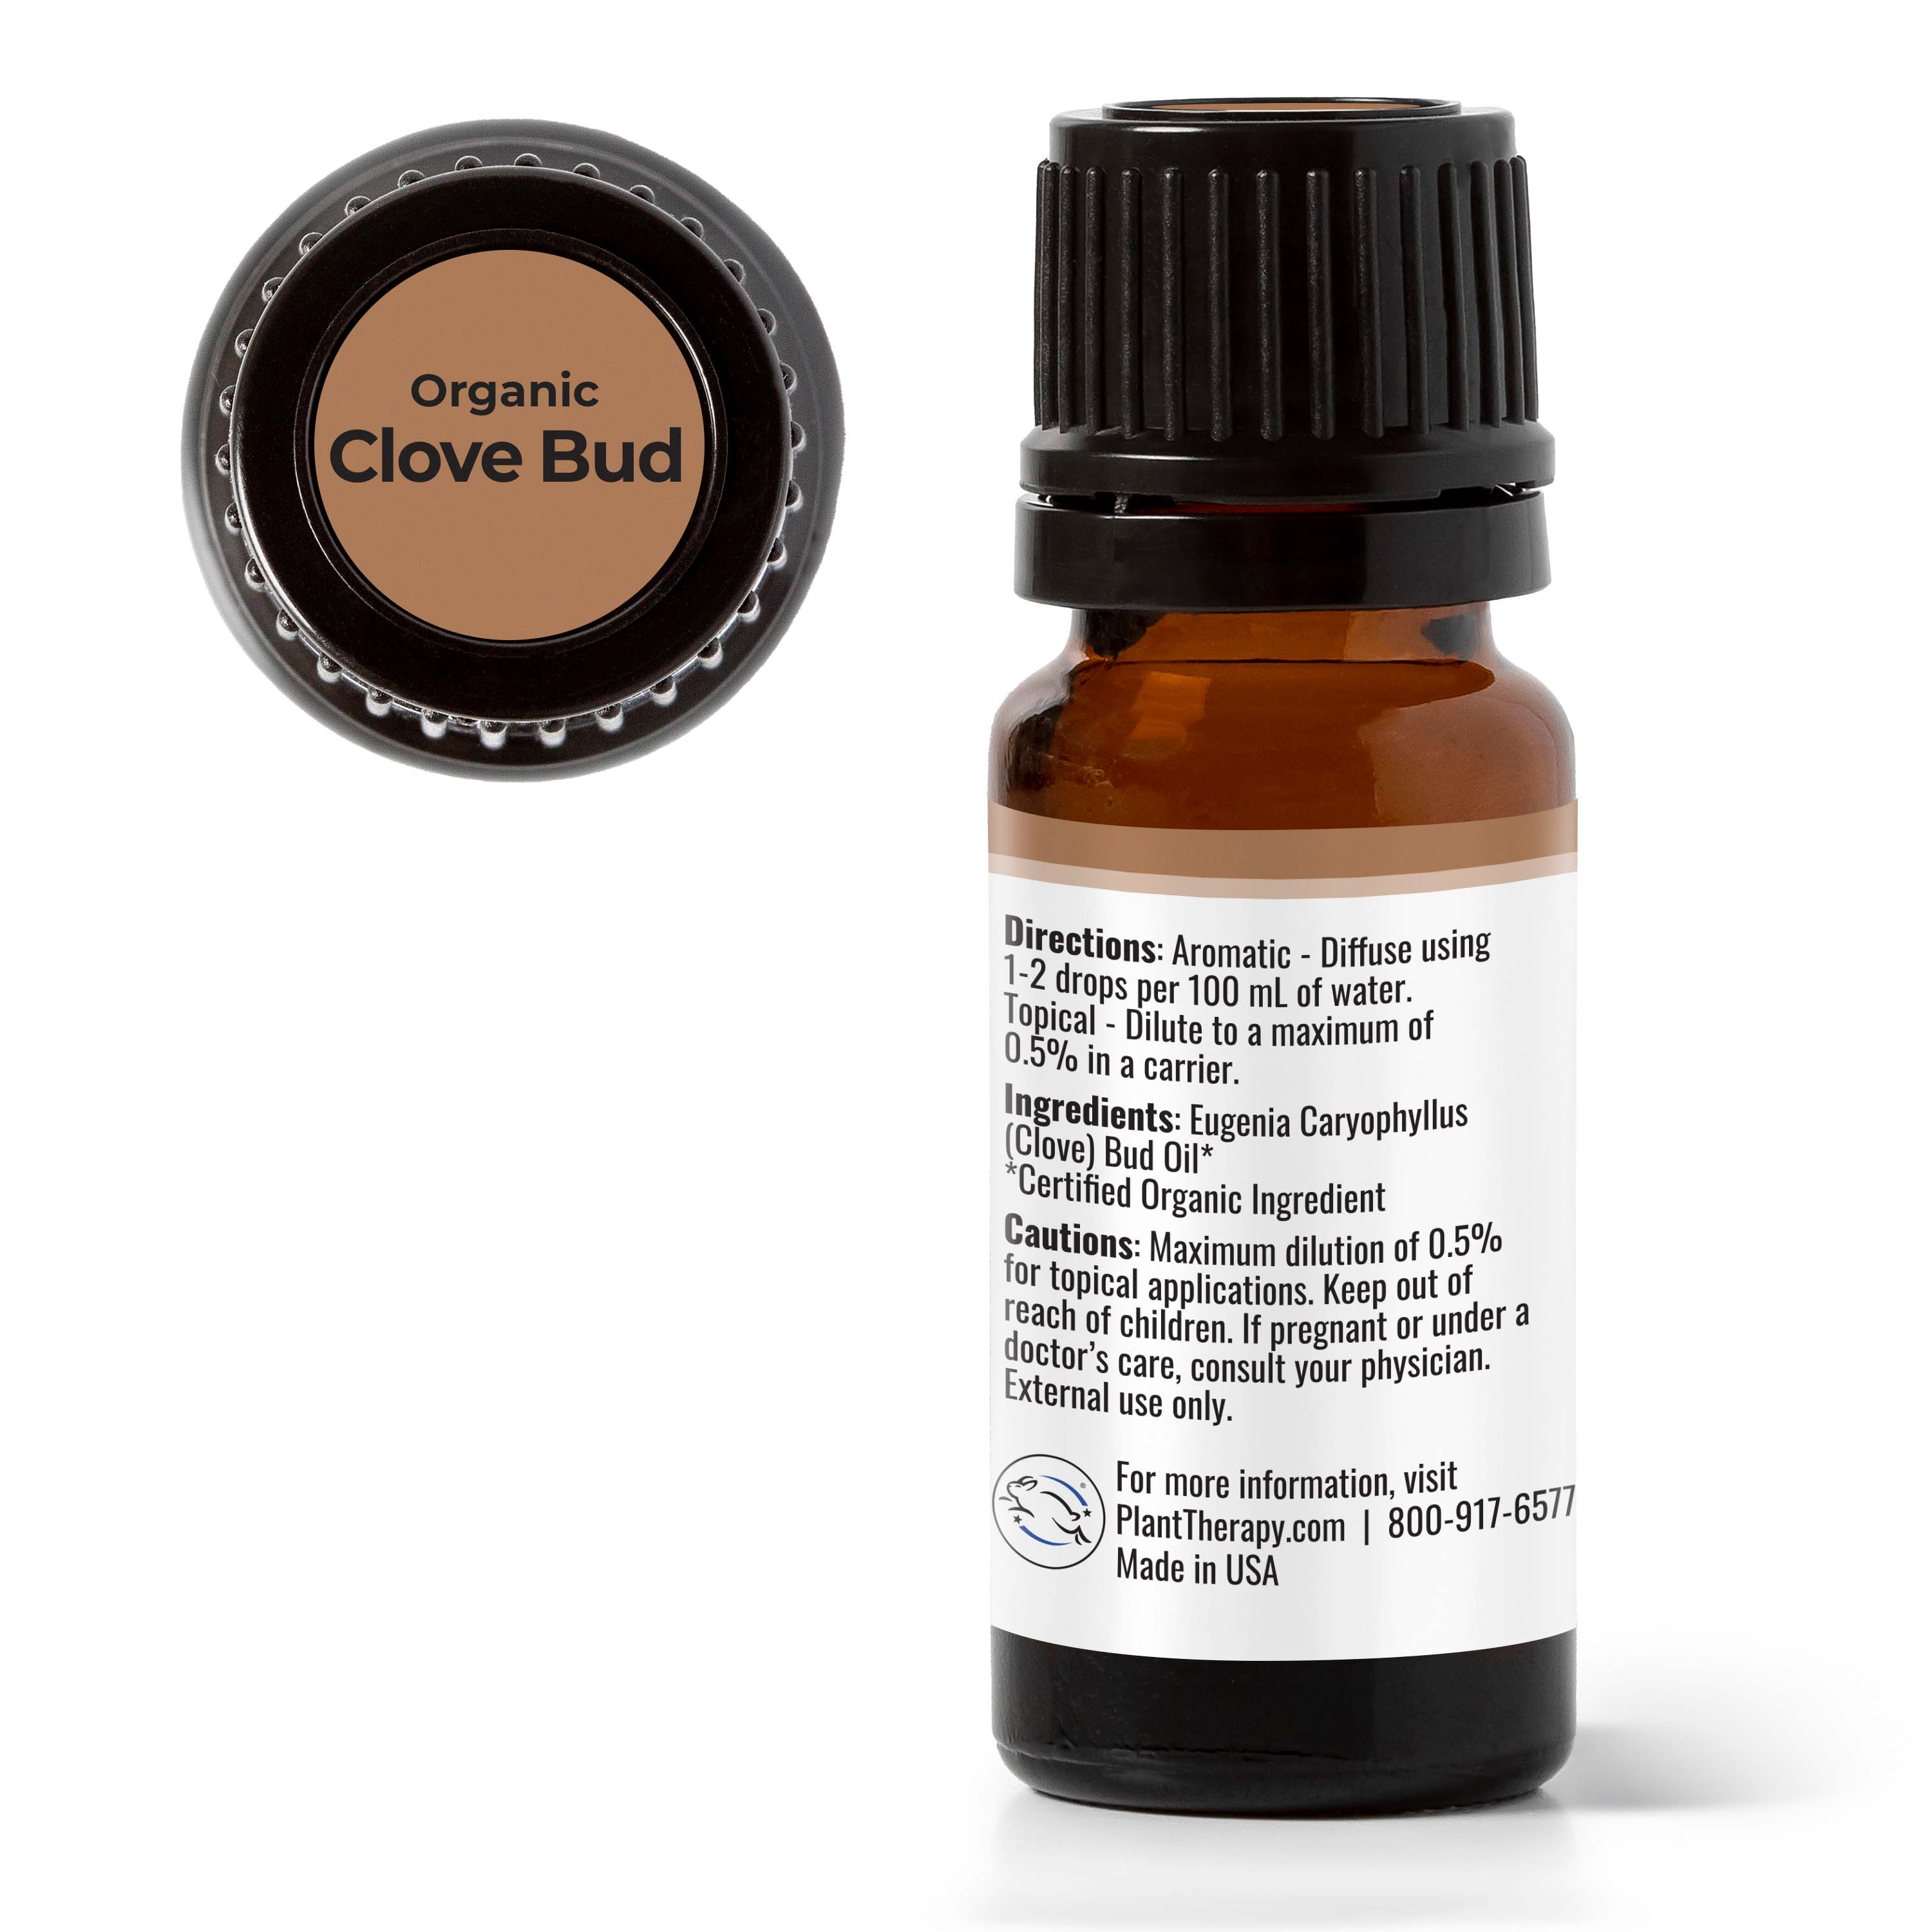 Plant Therapy Clove Bud Organic Essential Oil 100% Pure USDA Certified Organic, Undiluted, Natural Aromatherapy 10mL - image 3 of 7